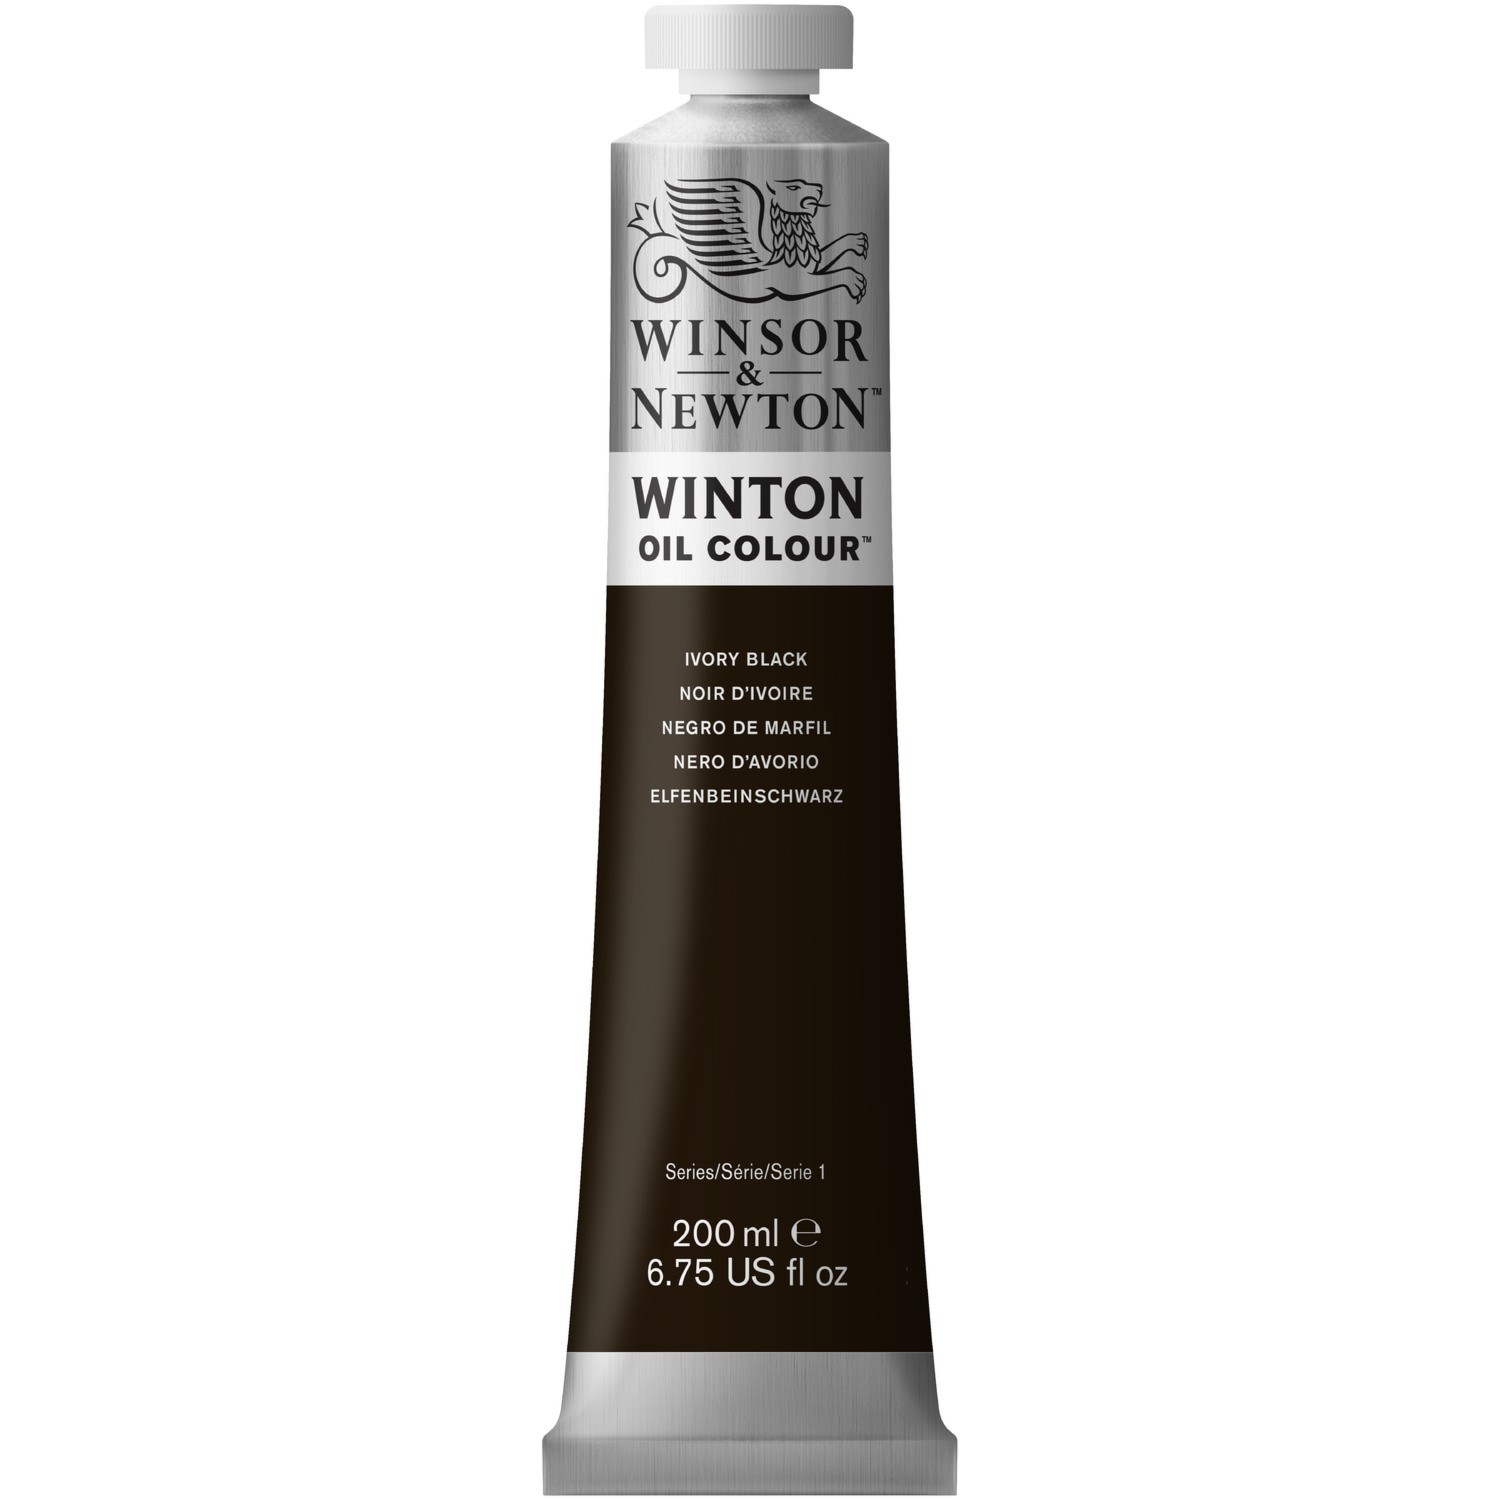 Winsor and Newton 200ml Winton Oil Colours - Ivory Black Image 1